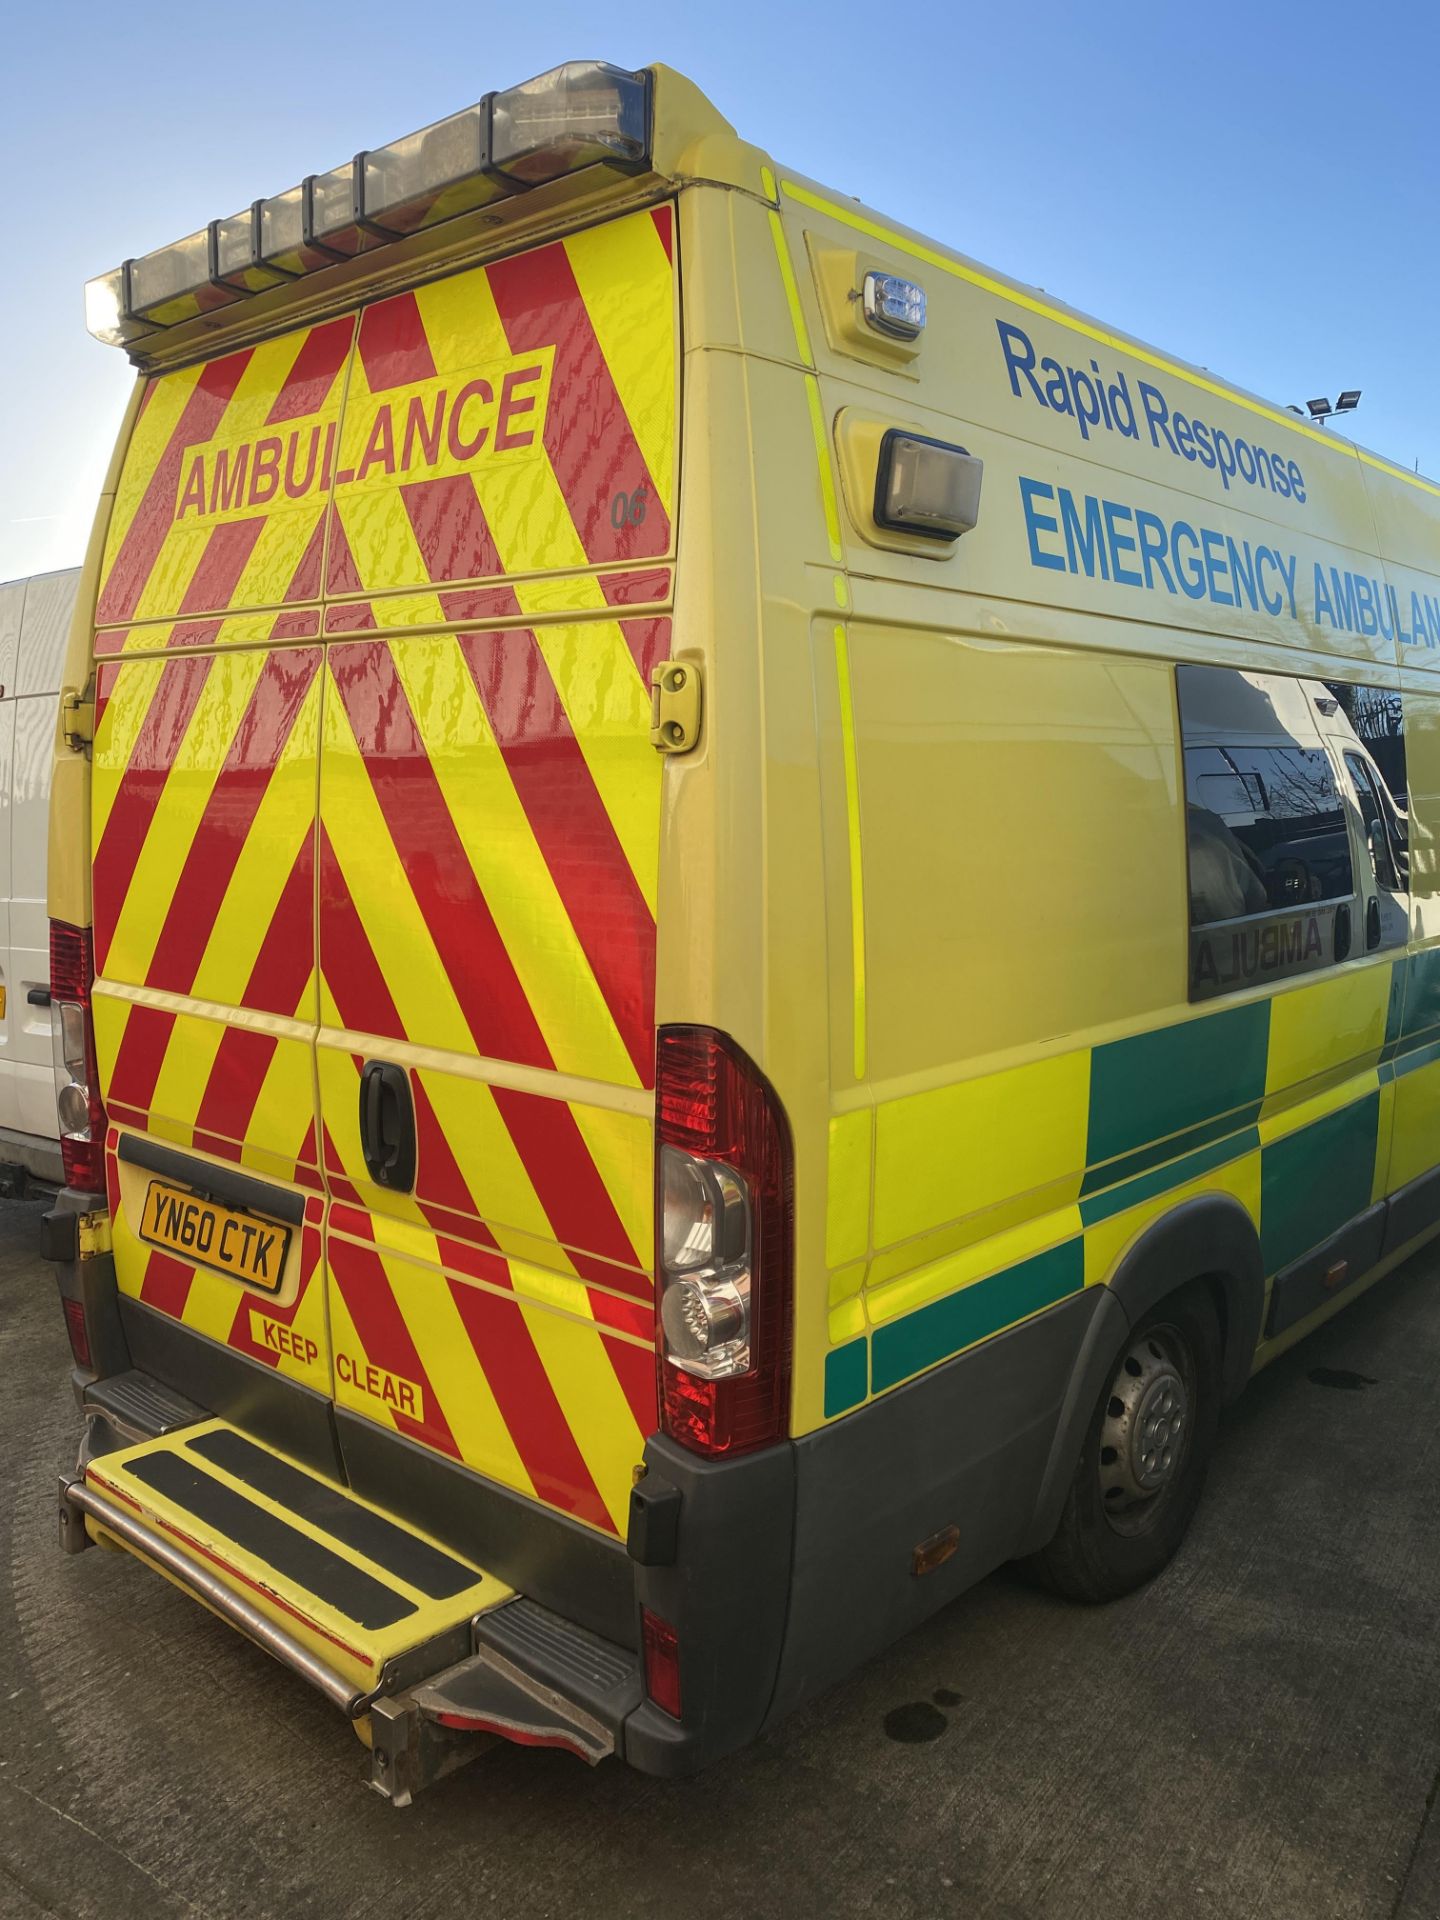 FIAT DUCATO 40 MAXI 160 M-JET VAN LIVERIED UP AS AN AMBULANCE - Diesel - Yellow. - Image 15 of 23